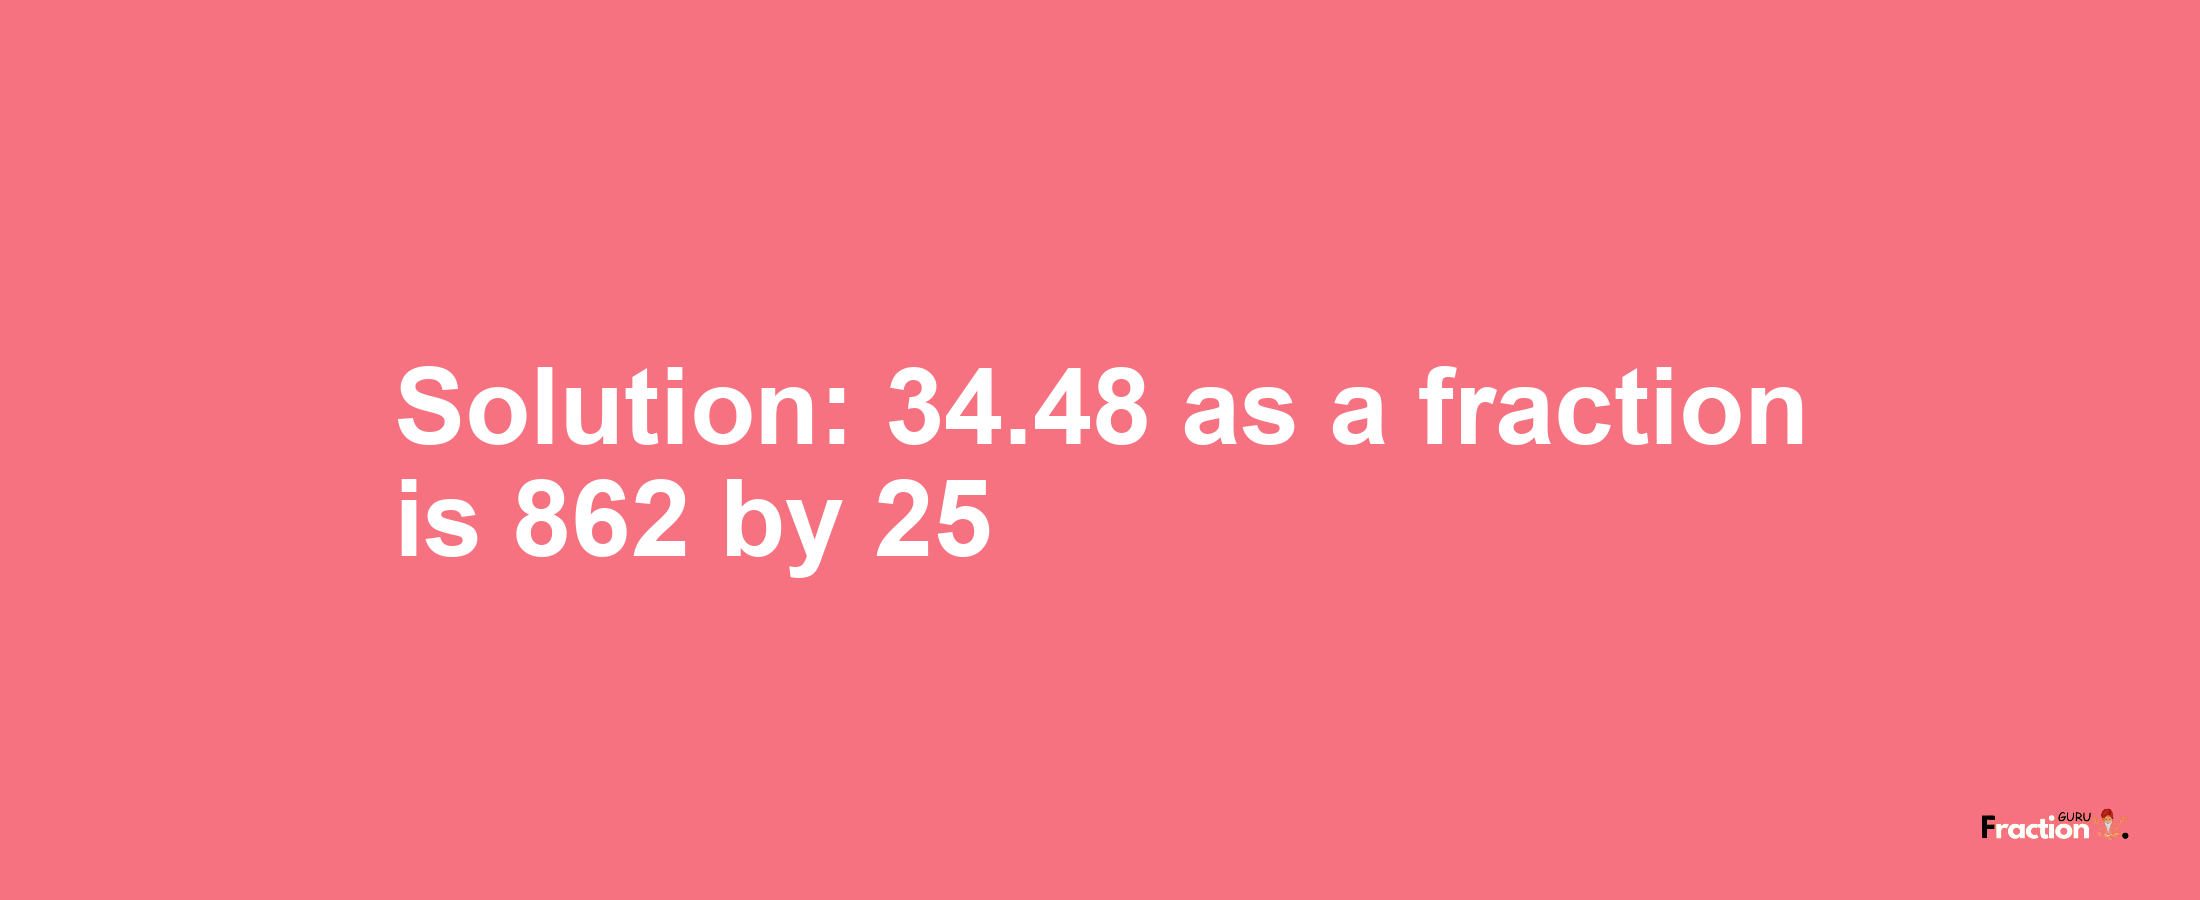 Solution:34.48 as a fraction is 862/25